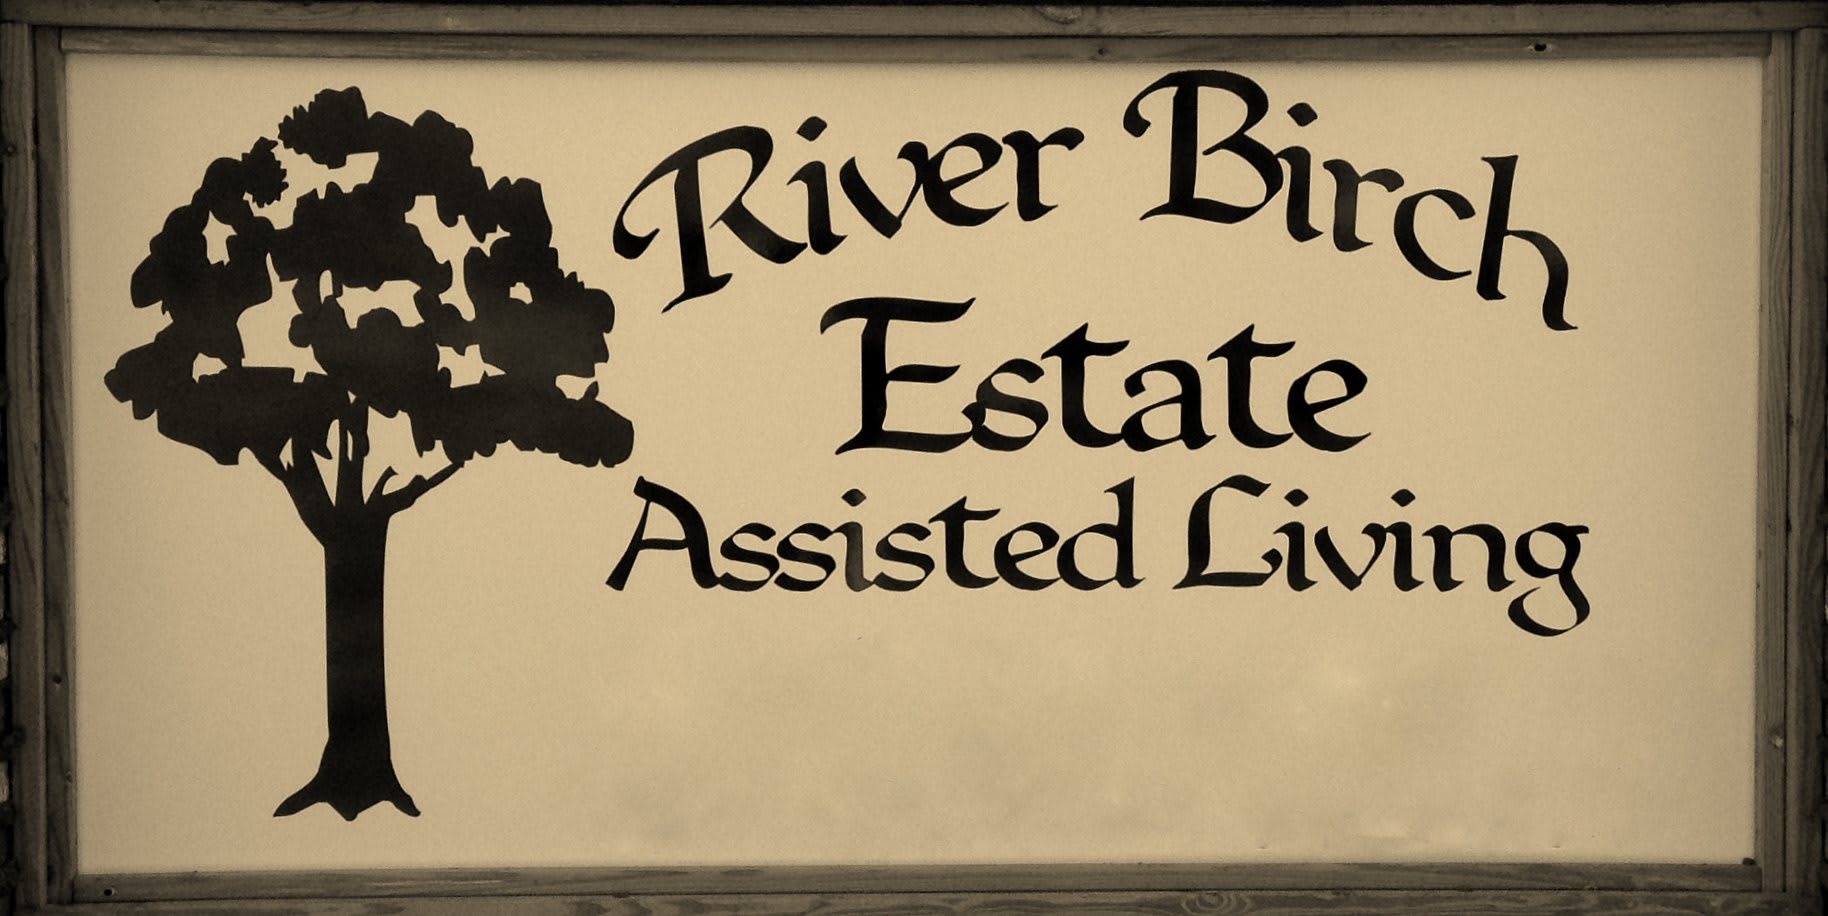 Photo of River Birch Estate Assisted Living